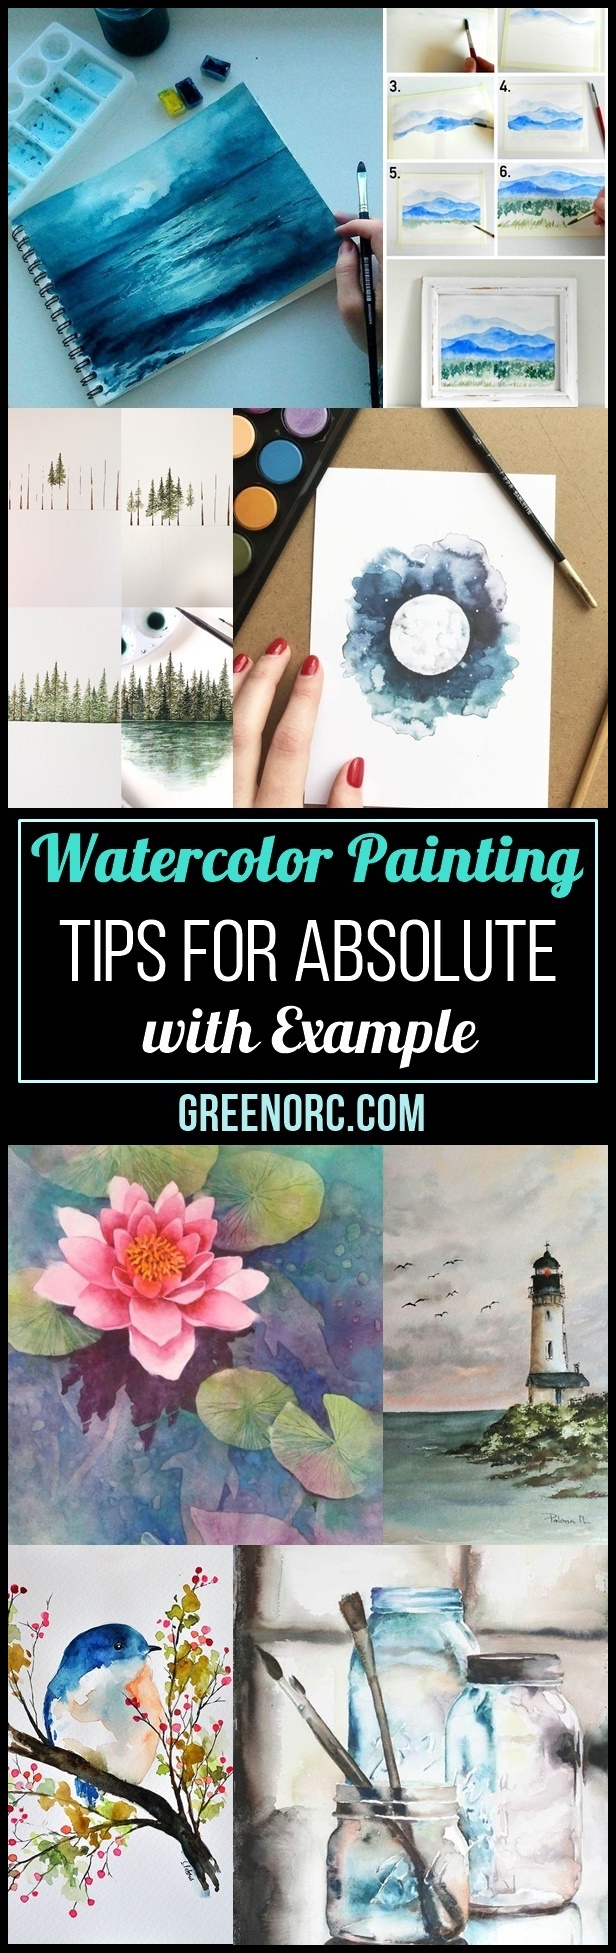 Watercolor Painting Tips for Absolute Beginners with Example